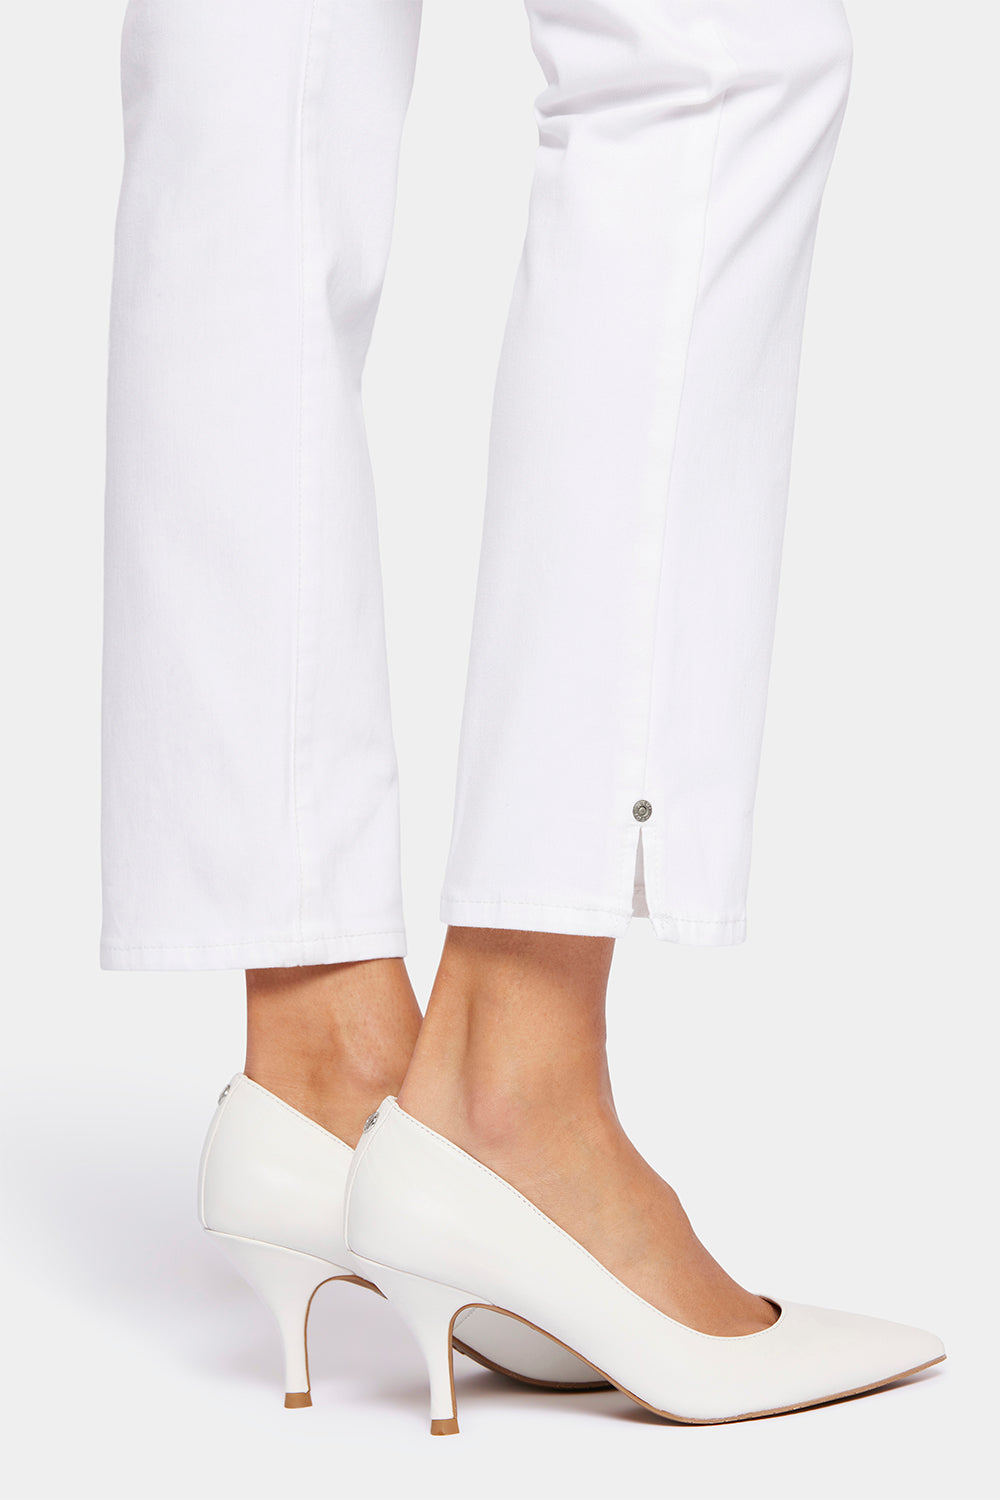 NYDJ Sheri Slim Ankle Jeans With Riveted Side Slits - Optic White